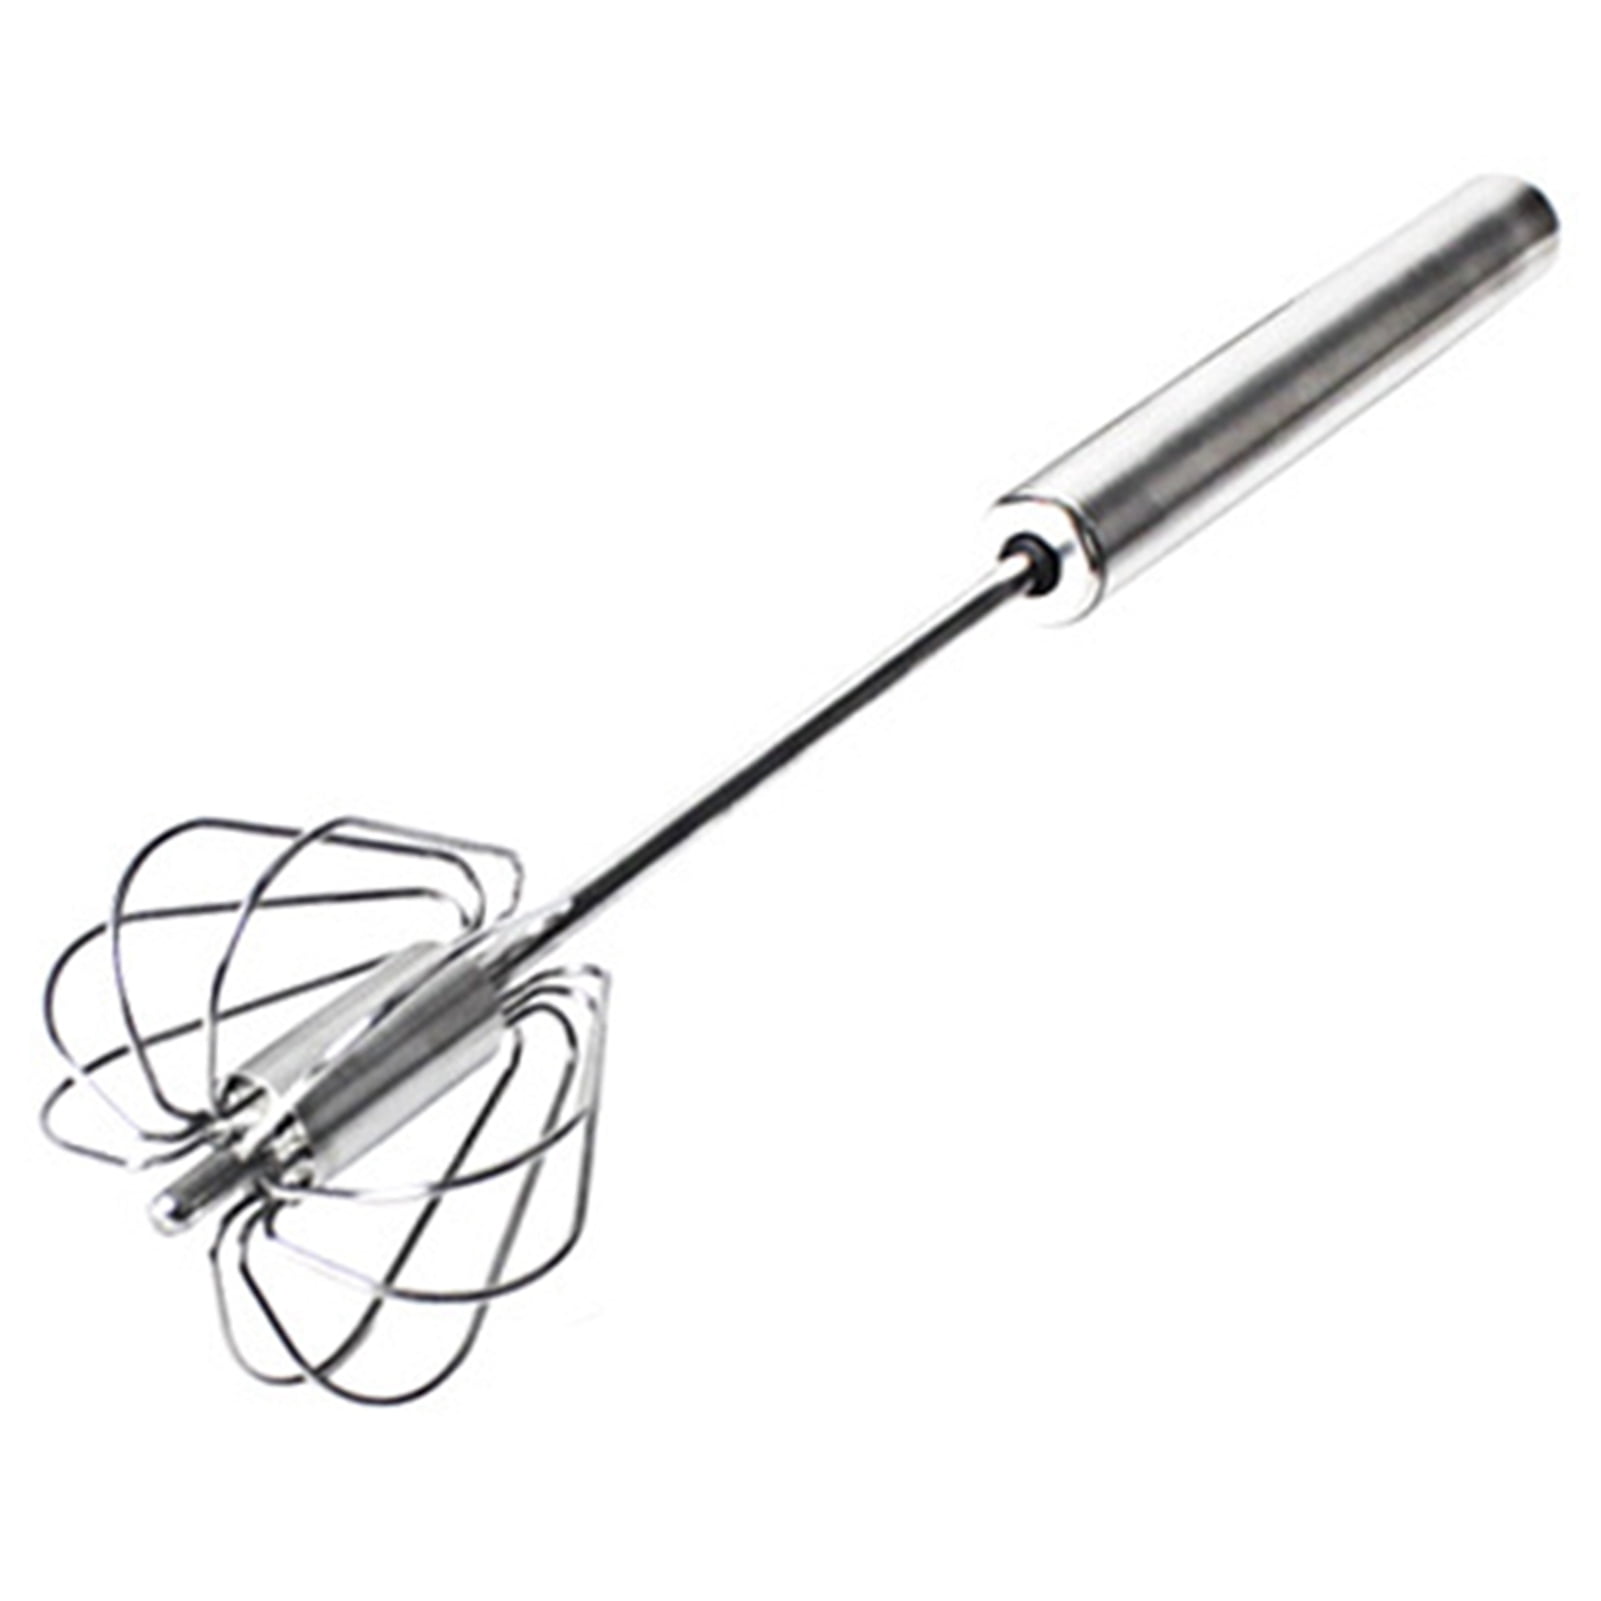 10"12" Semi-automatic Rotating Egg Beater Stainless Steel Push Hand Whisk Mixer 